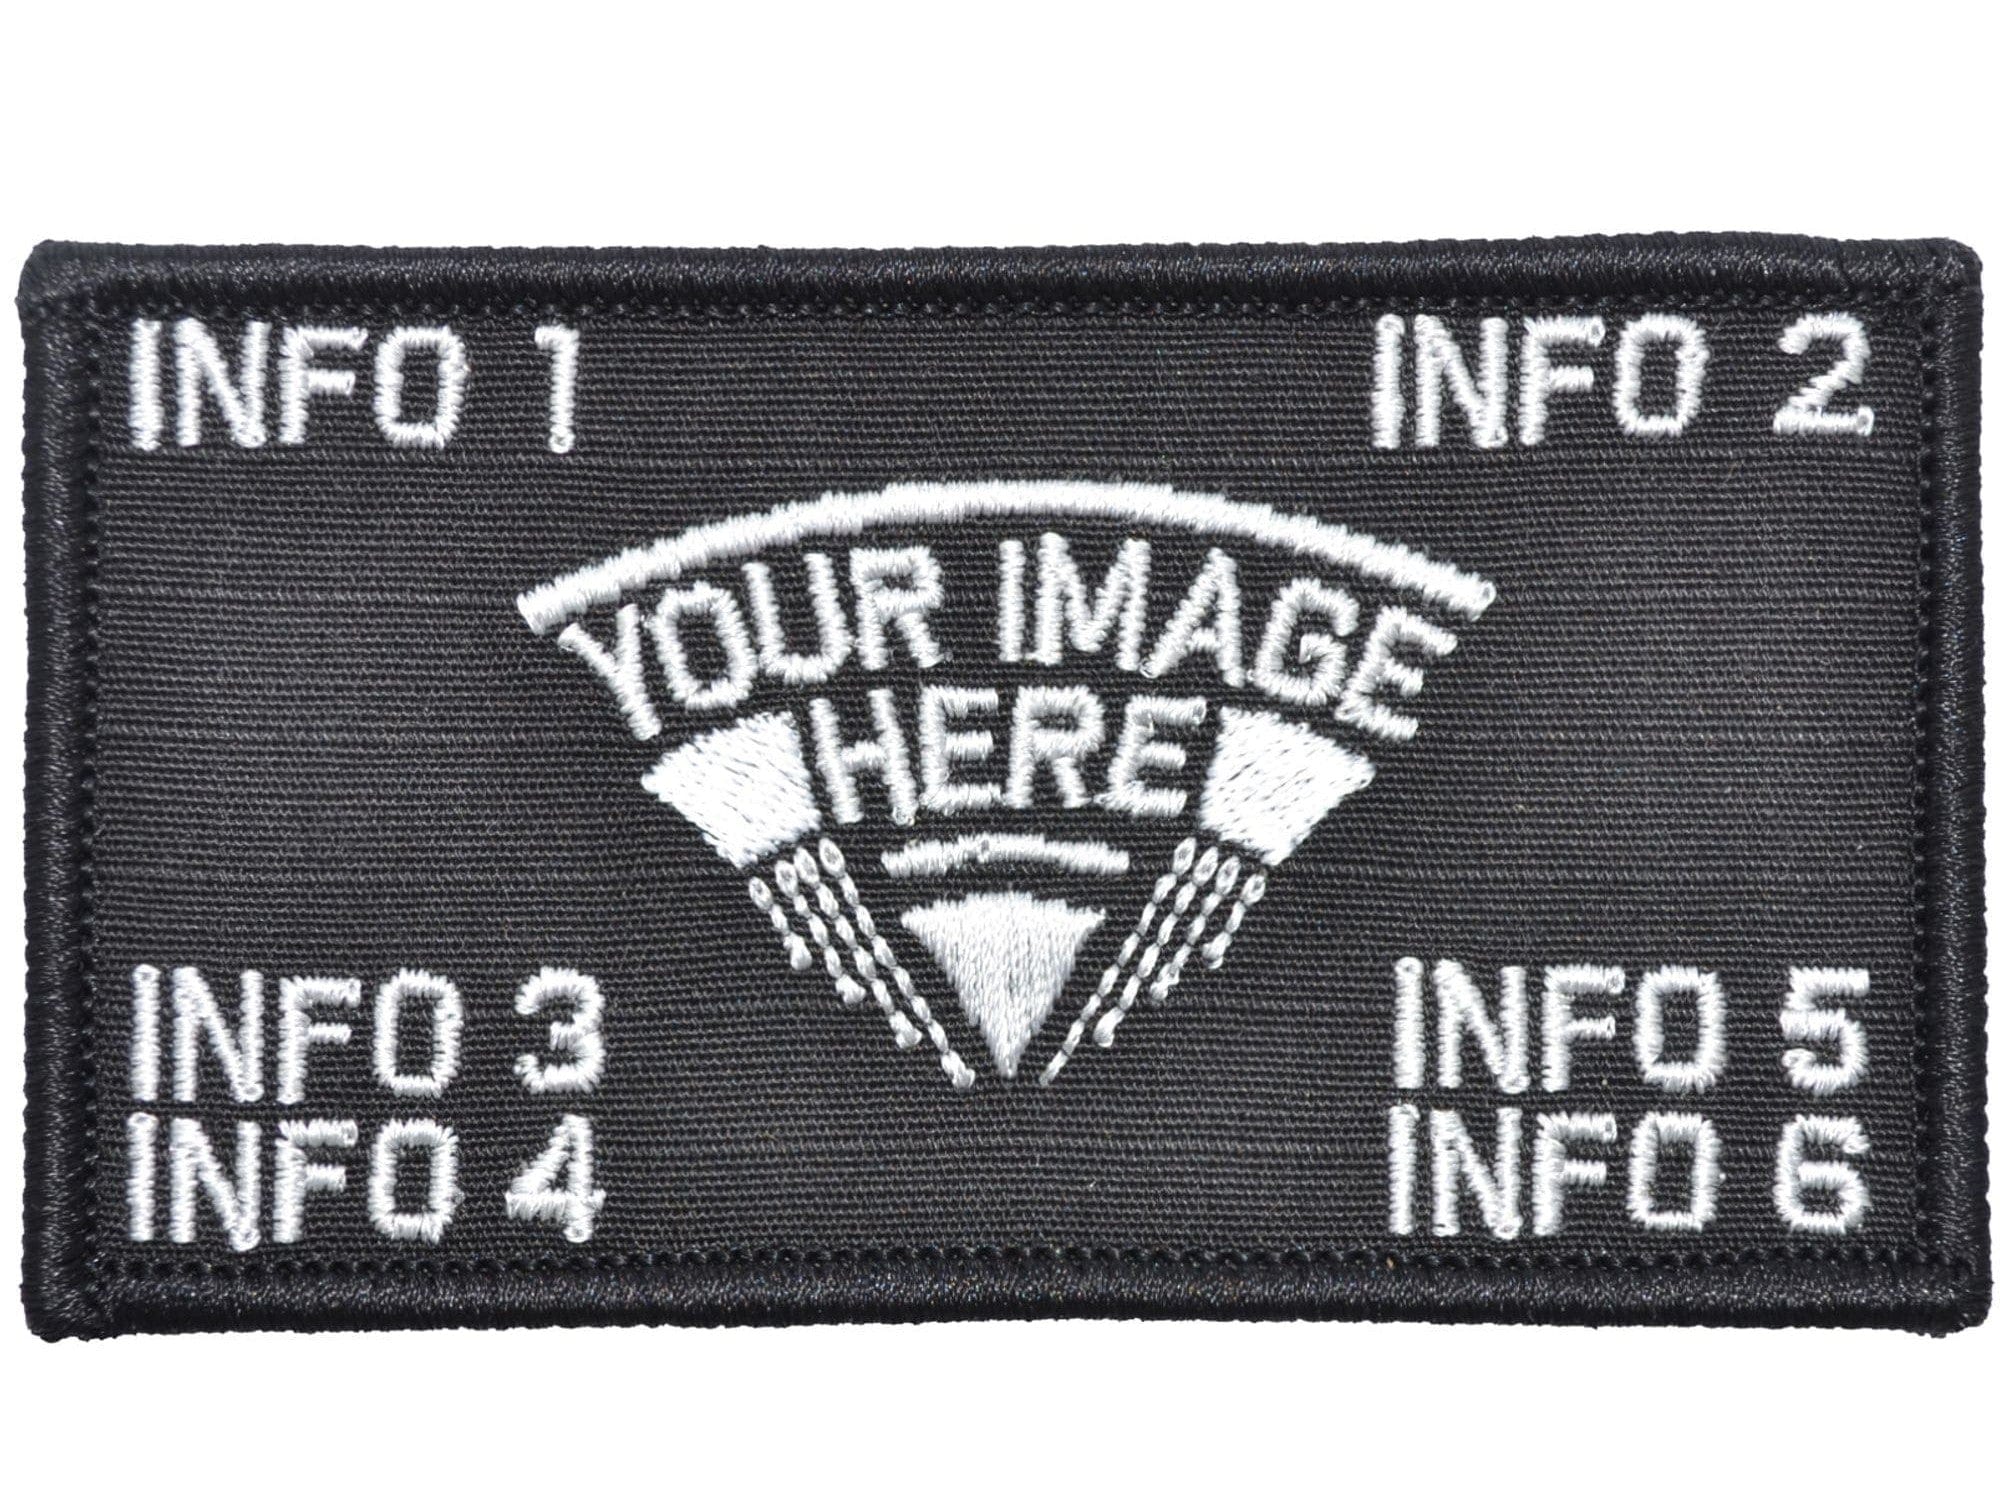 Custom Embroidery Name Patches.2 Pieces Personalized Military Number Tag Customized Logo ID for Multiple Clothing Bags Vest Jackets Work Shirts